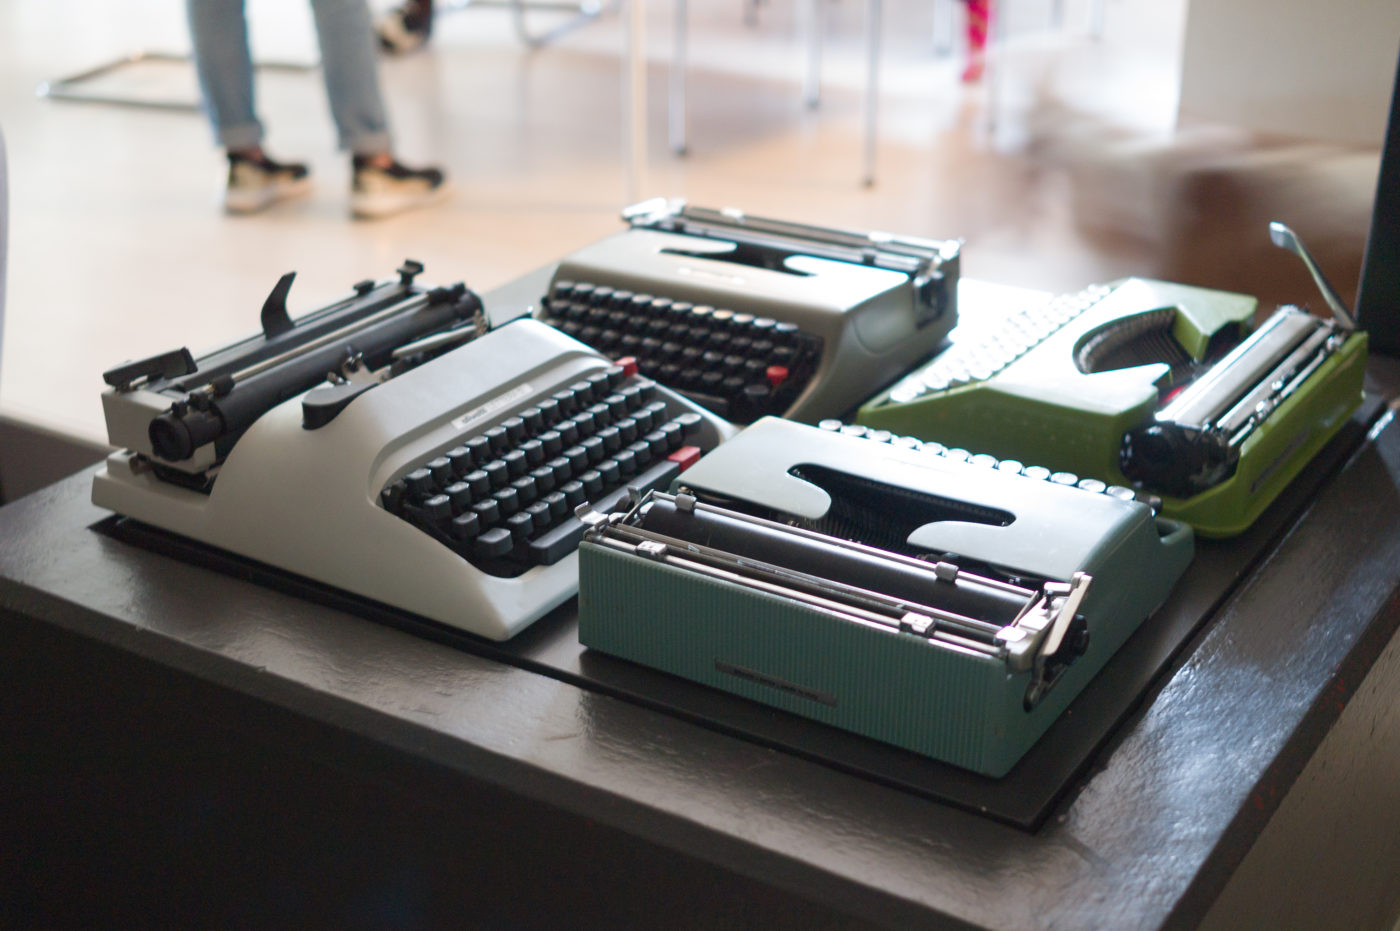 The Type Writers